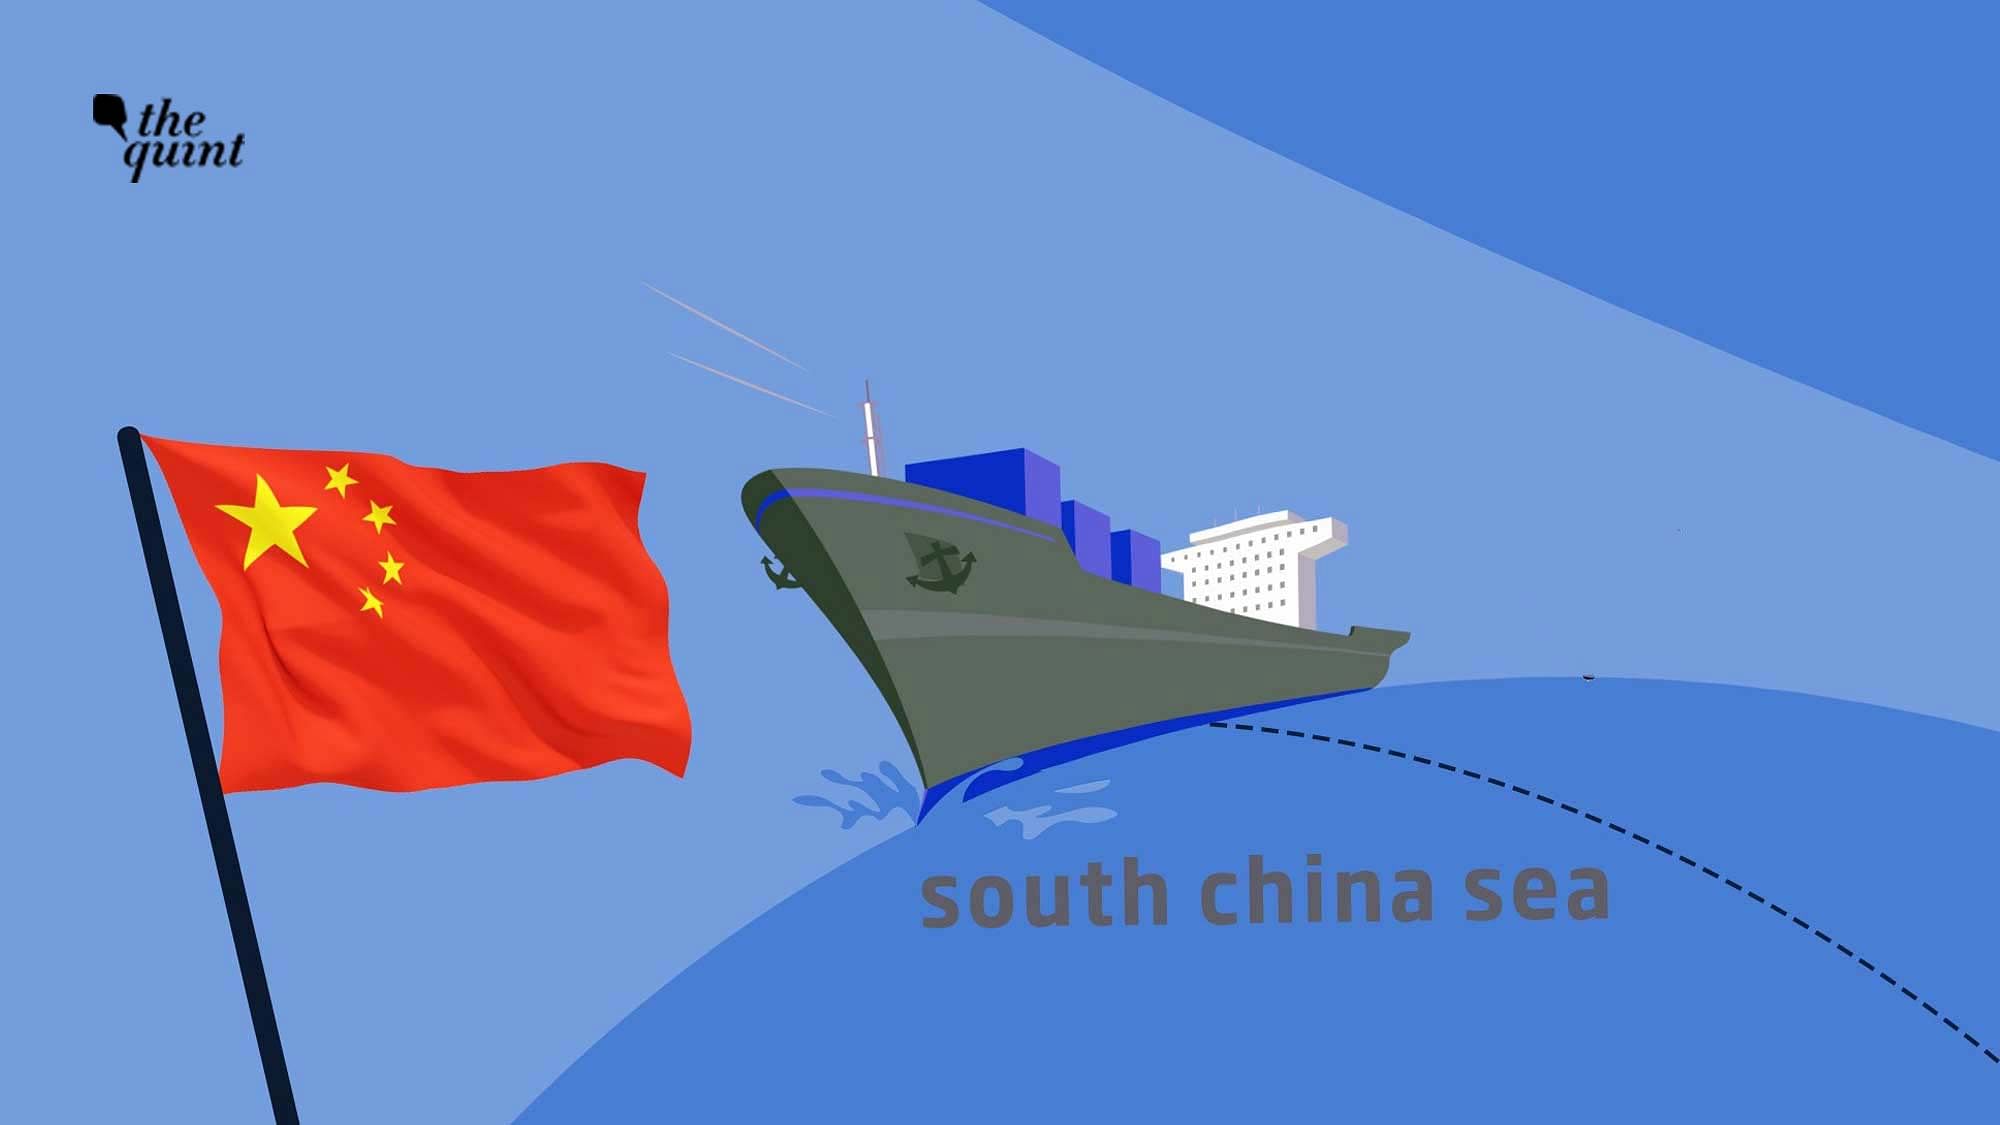 Image of Chinese flag used for representational purposes.